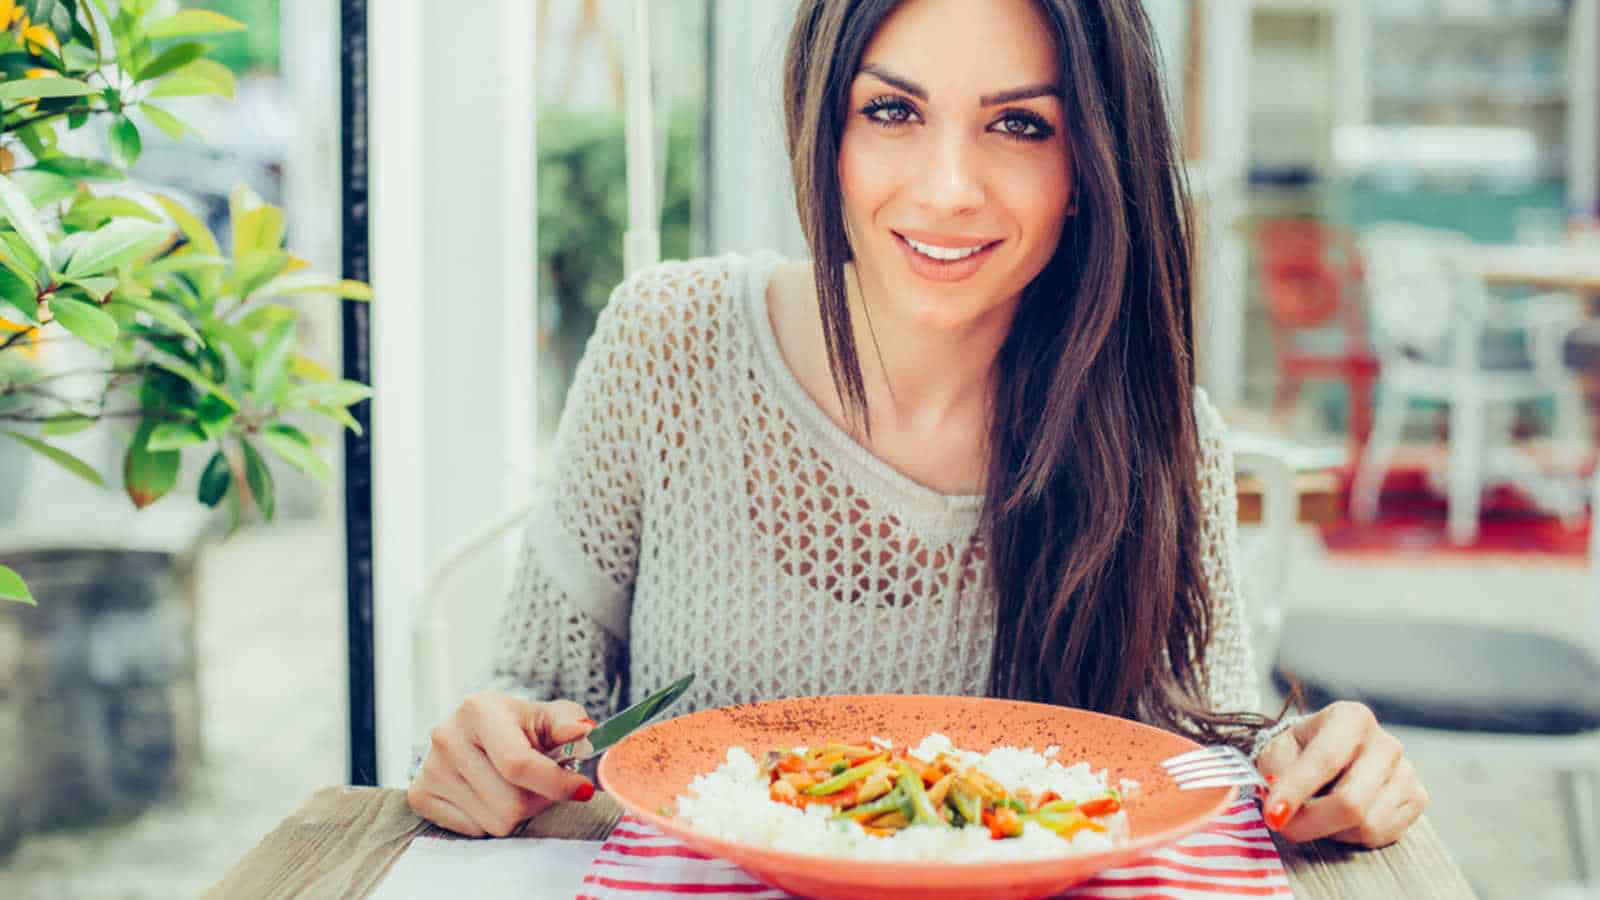 8 Lifestyle Changes That Can Help You Manage a Tighter Food Budget